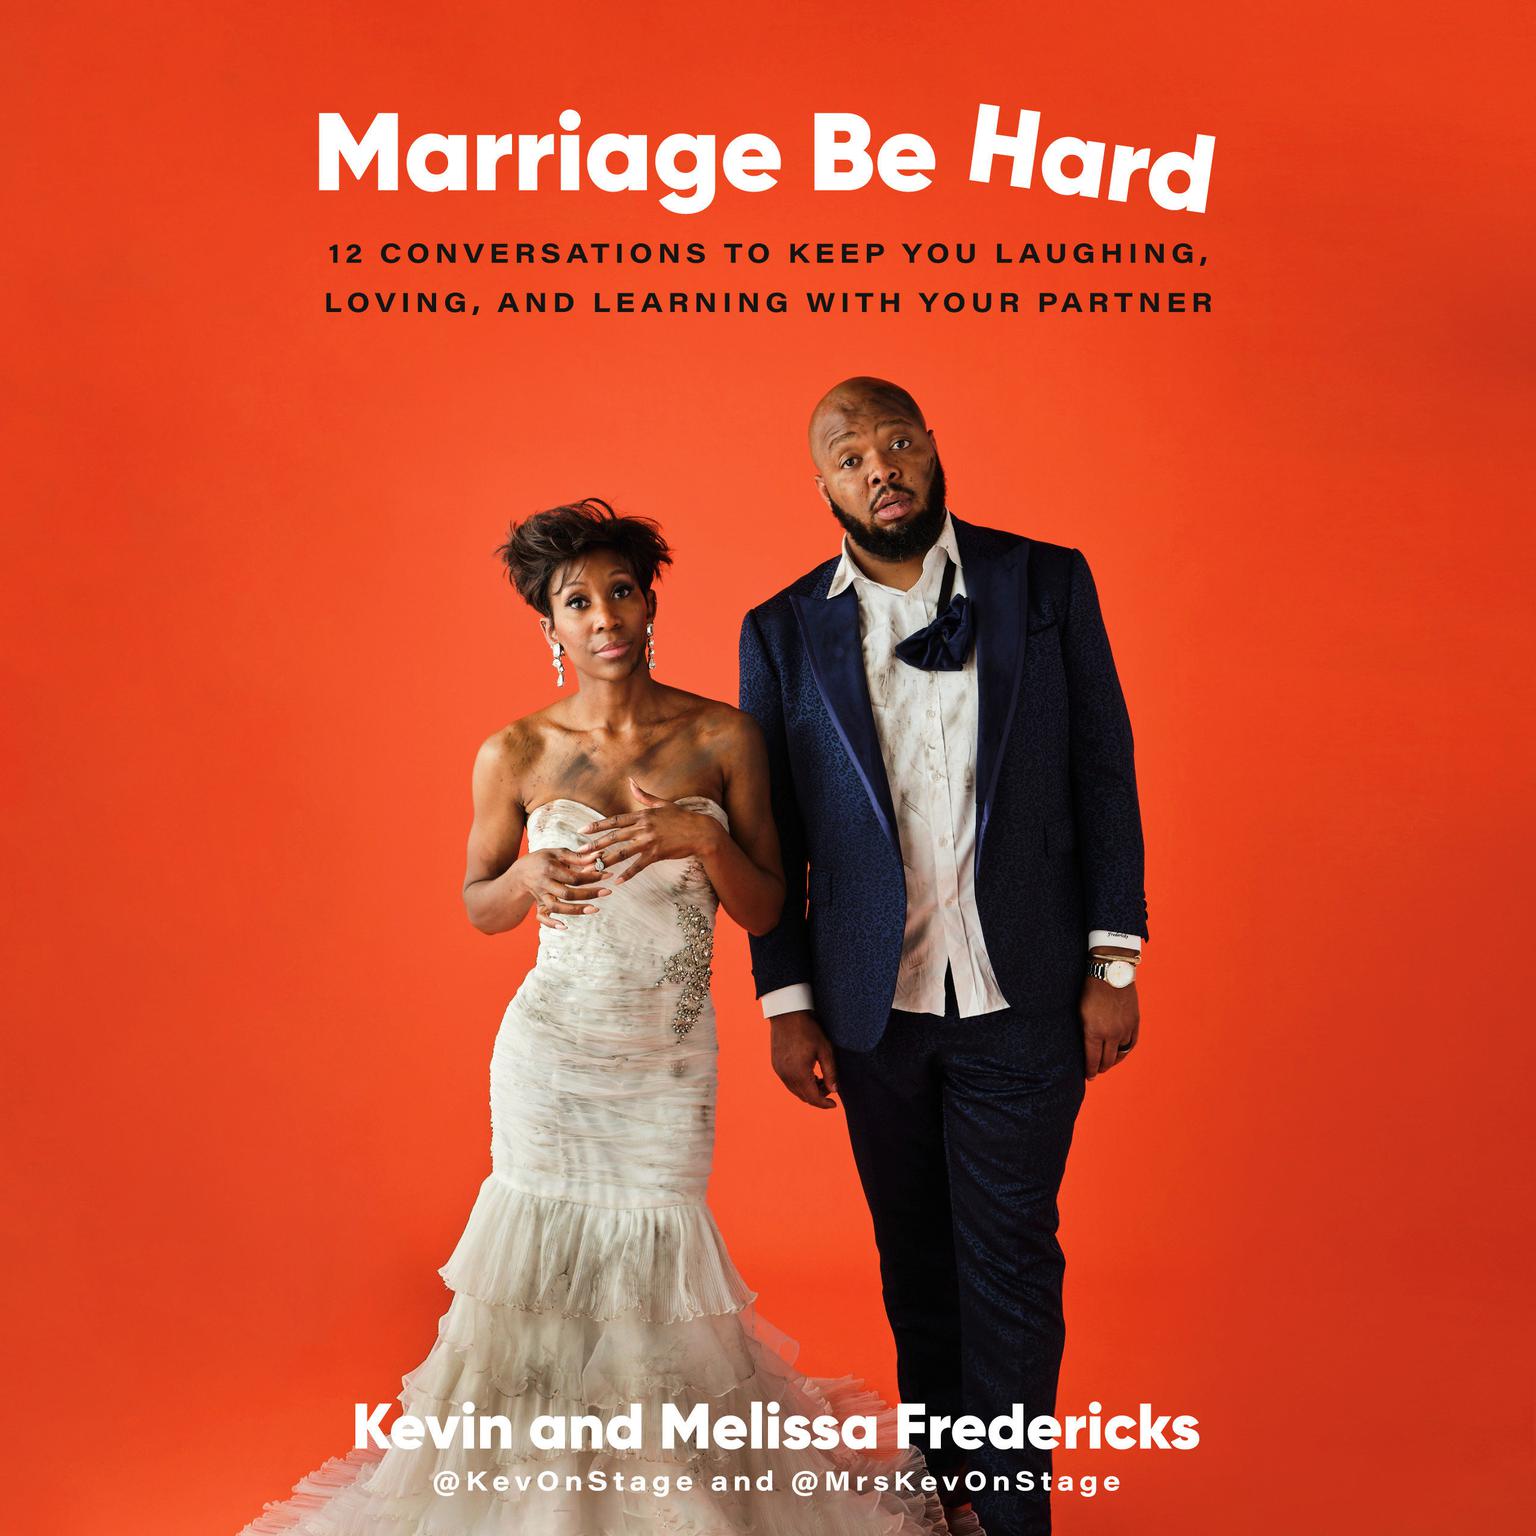 Marriage Be Hard: 12 Conversations to Keep You Laughing, Loving, and Learning with Your Partner Audiobook, by Kevin Fredericks